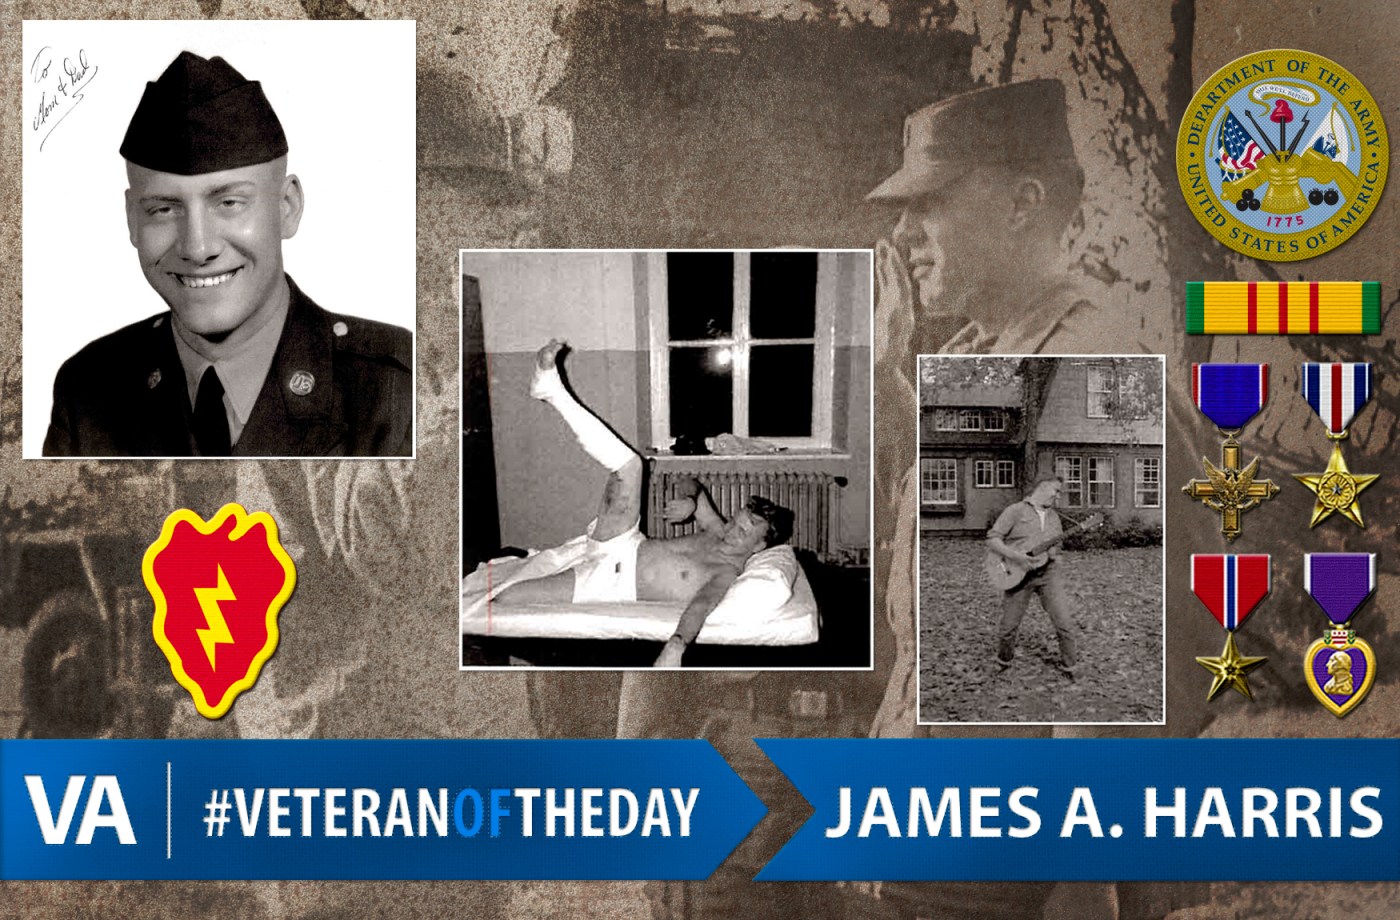 Veteran of the Day James A. Harris